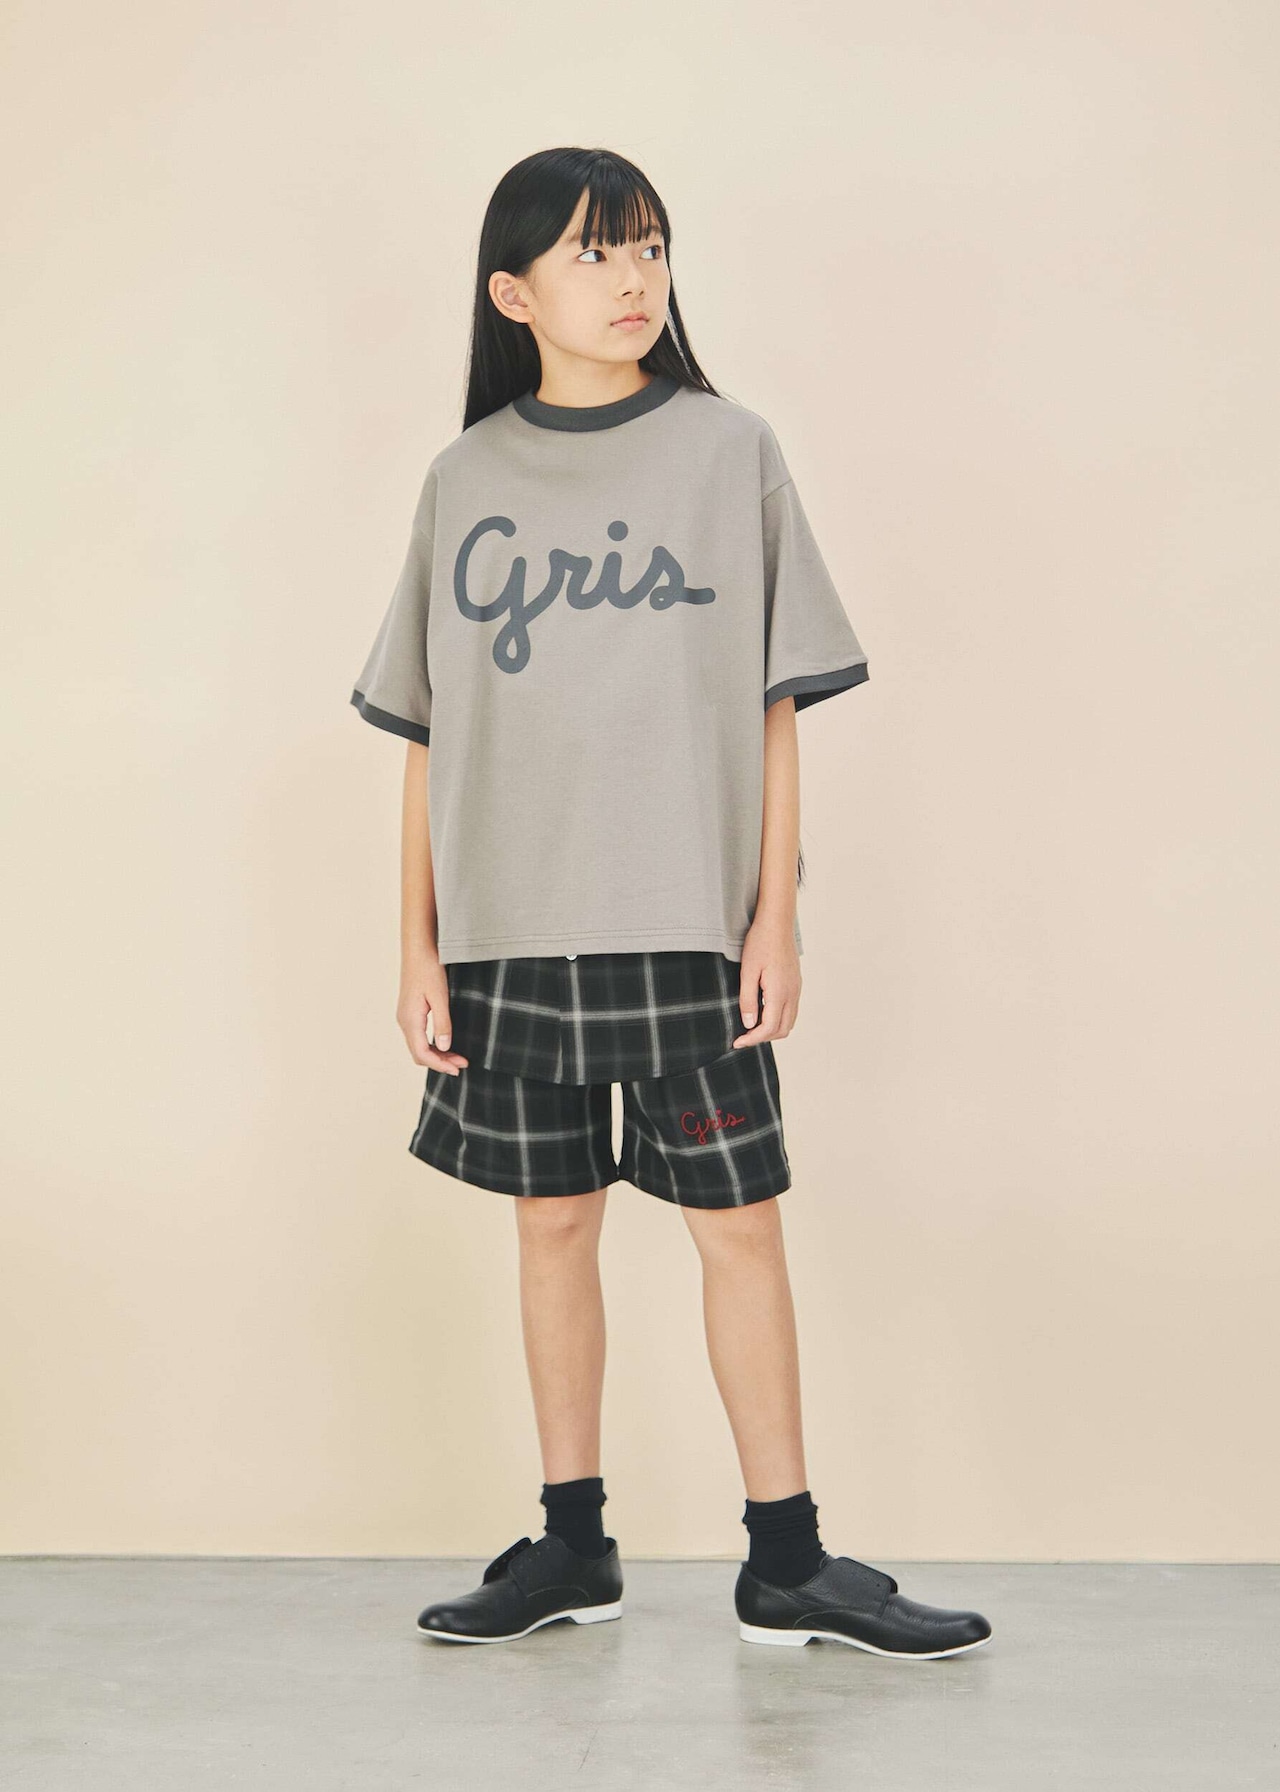 〈 GRIS 24SS 〉 Ringer Tee "Tシャツ" / Charcoal / size M